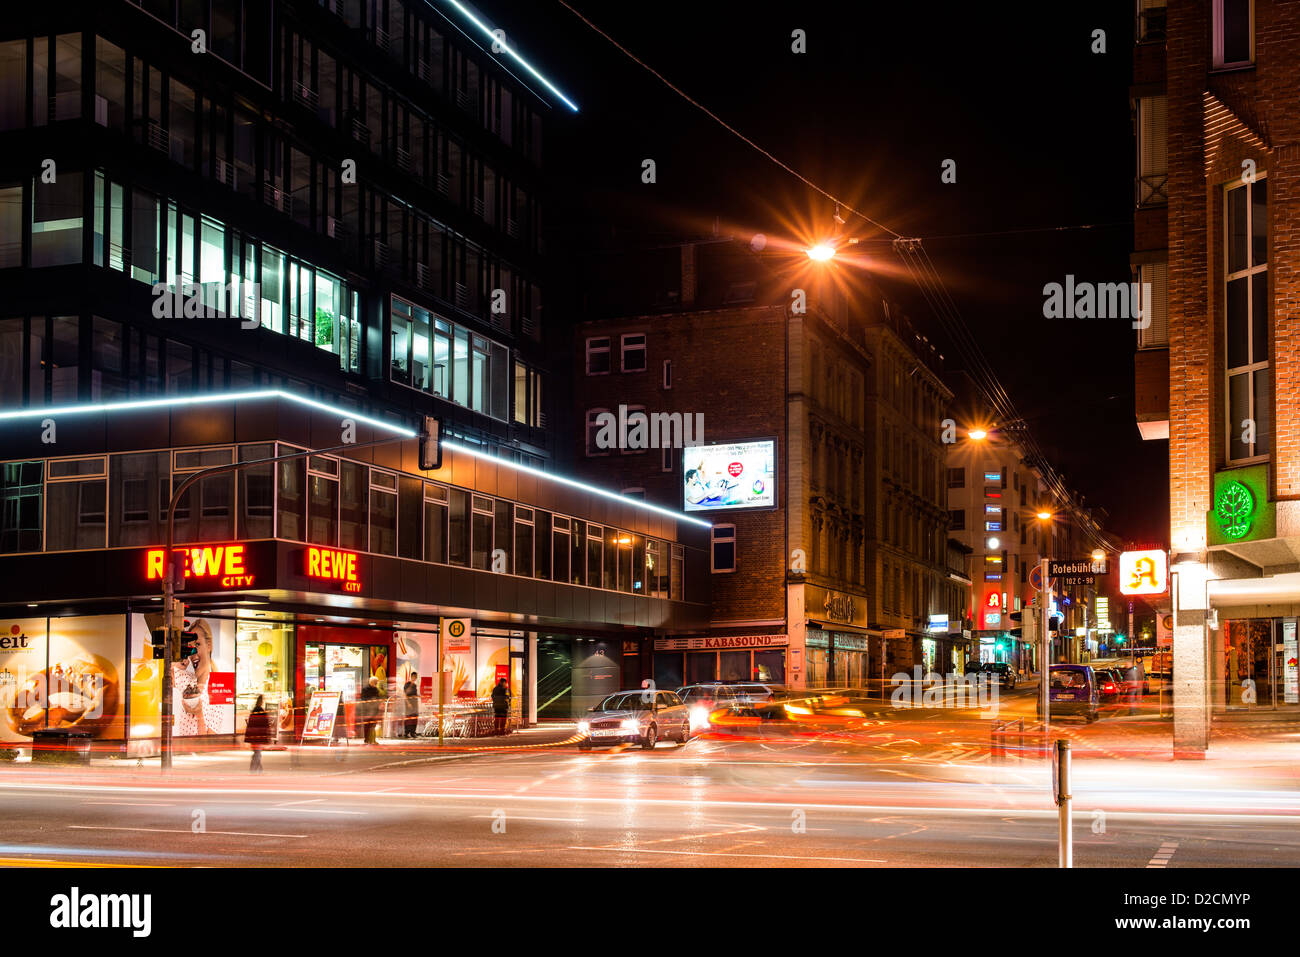 Vivid night scenery showing light traces of cars passing by in long exposure at an intersection on November 8, 2012 in Stuttgart Stock Photo